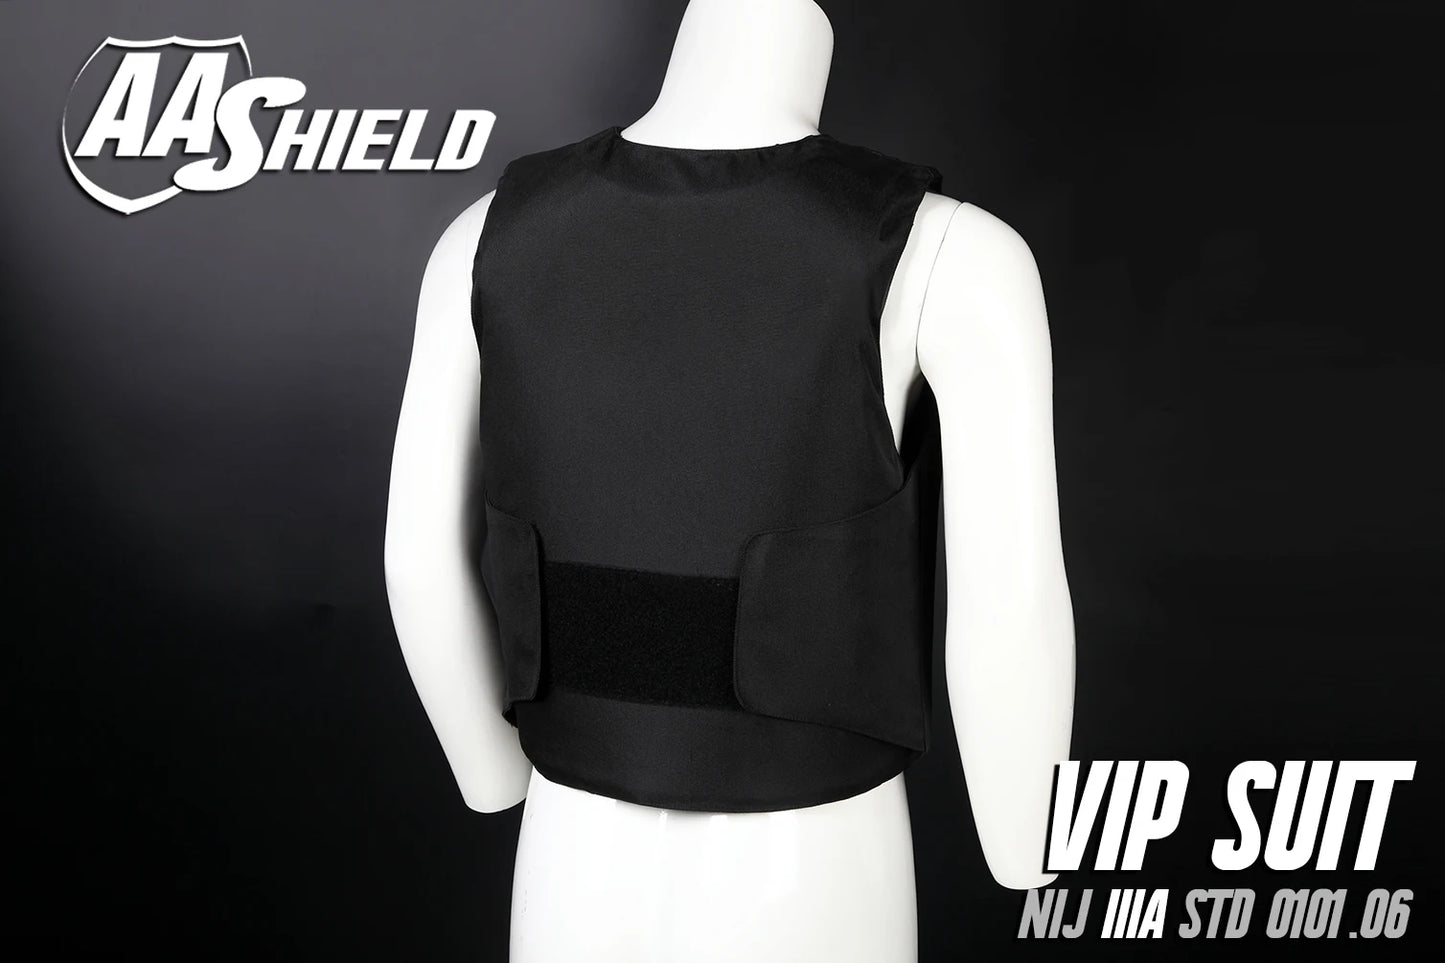 AA Shield Bulletproof Vest - VIP Body Armor Suit, Comfortable Aramid Core Insert, Safety Clothing in Black